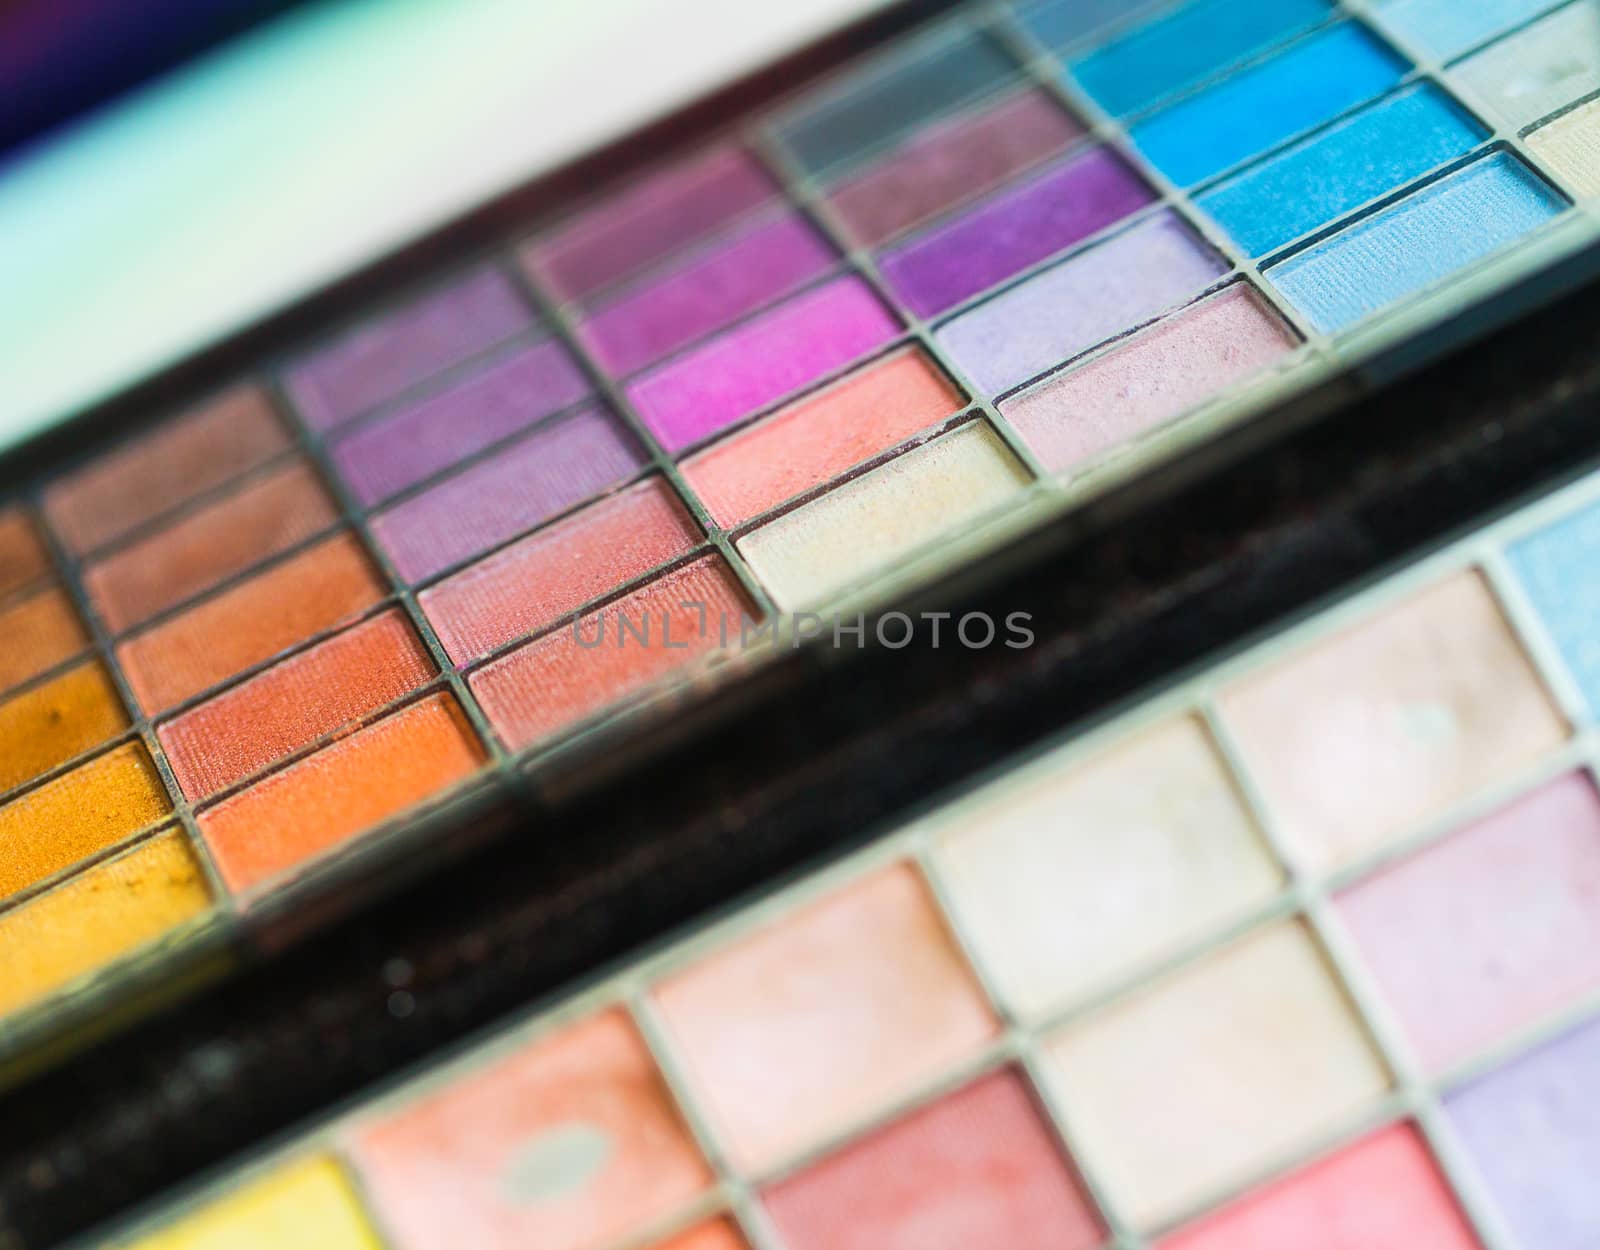 Makeup colorful eyeshadow palettes by vlad_star